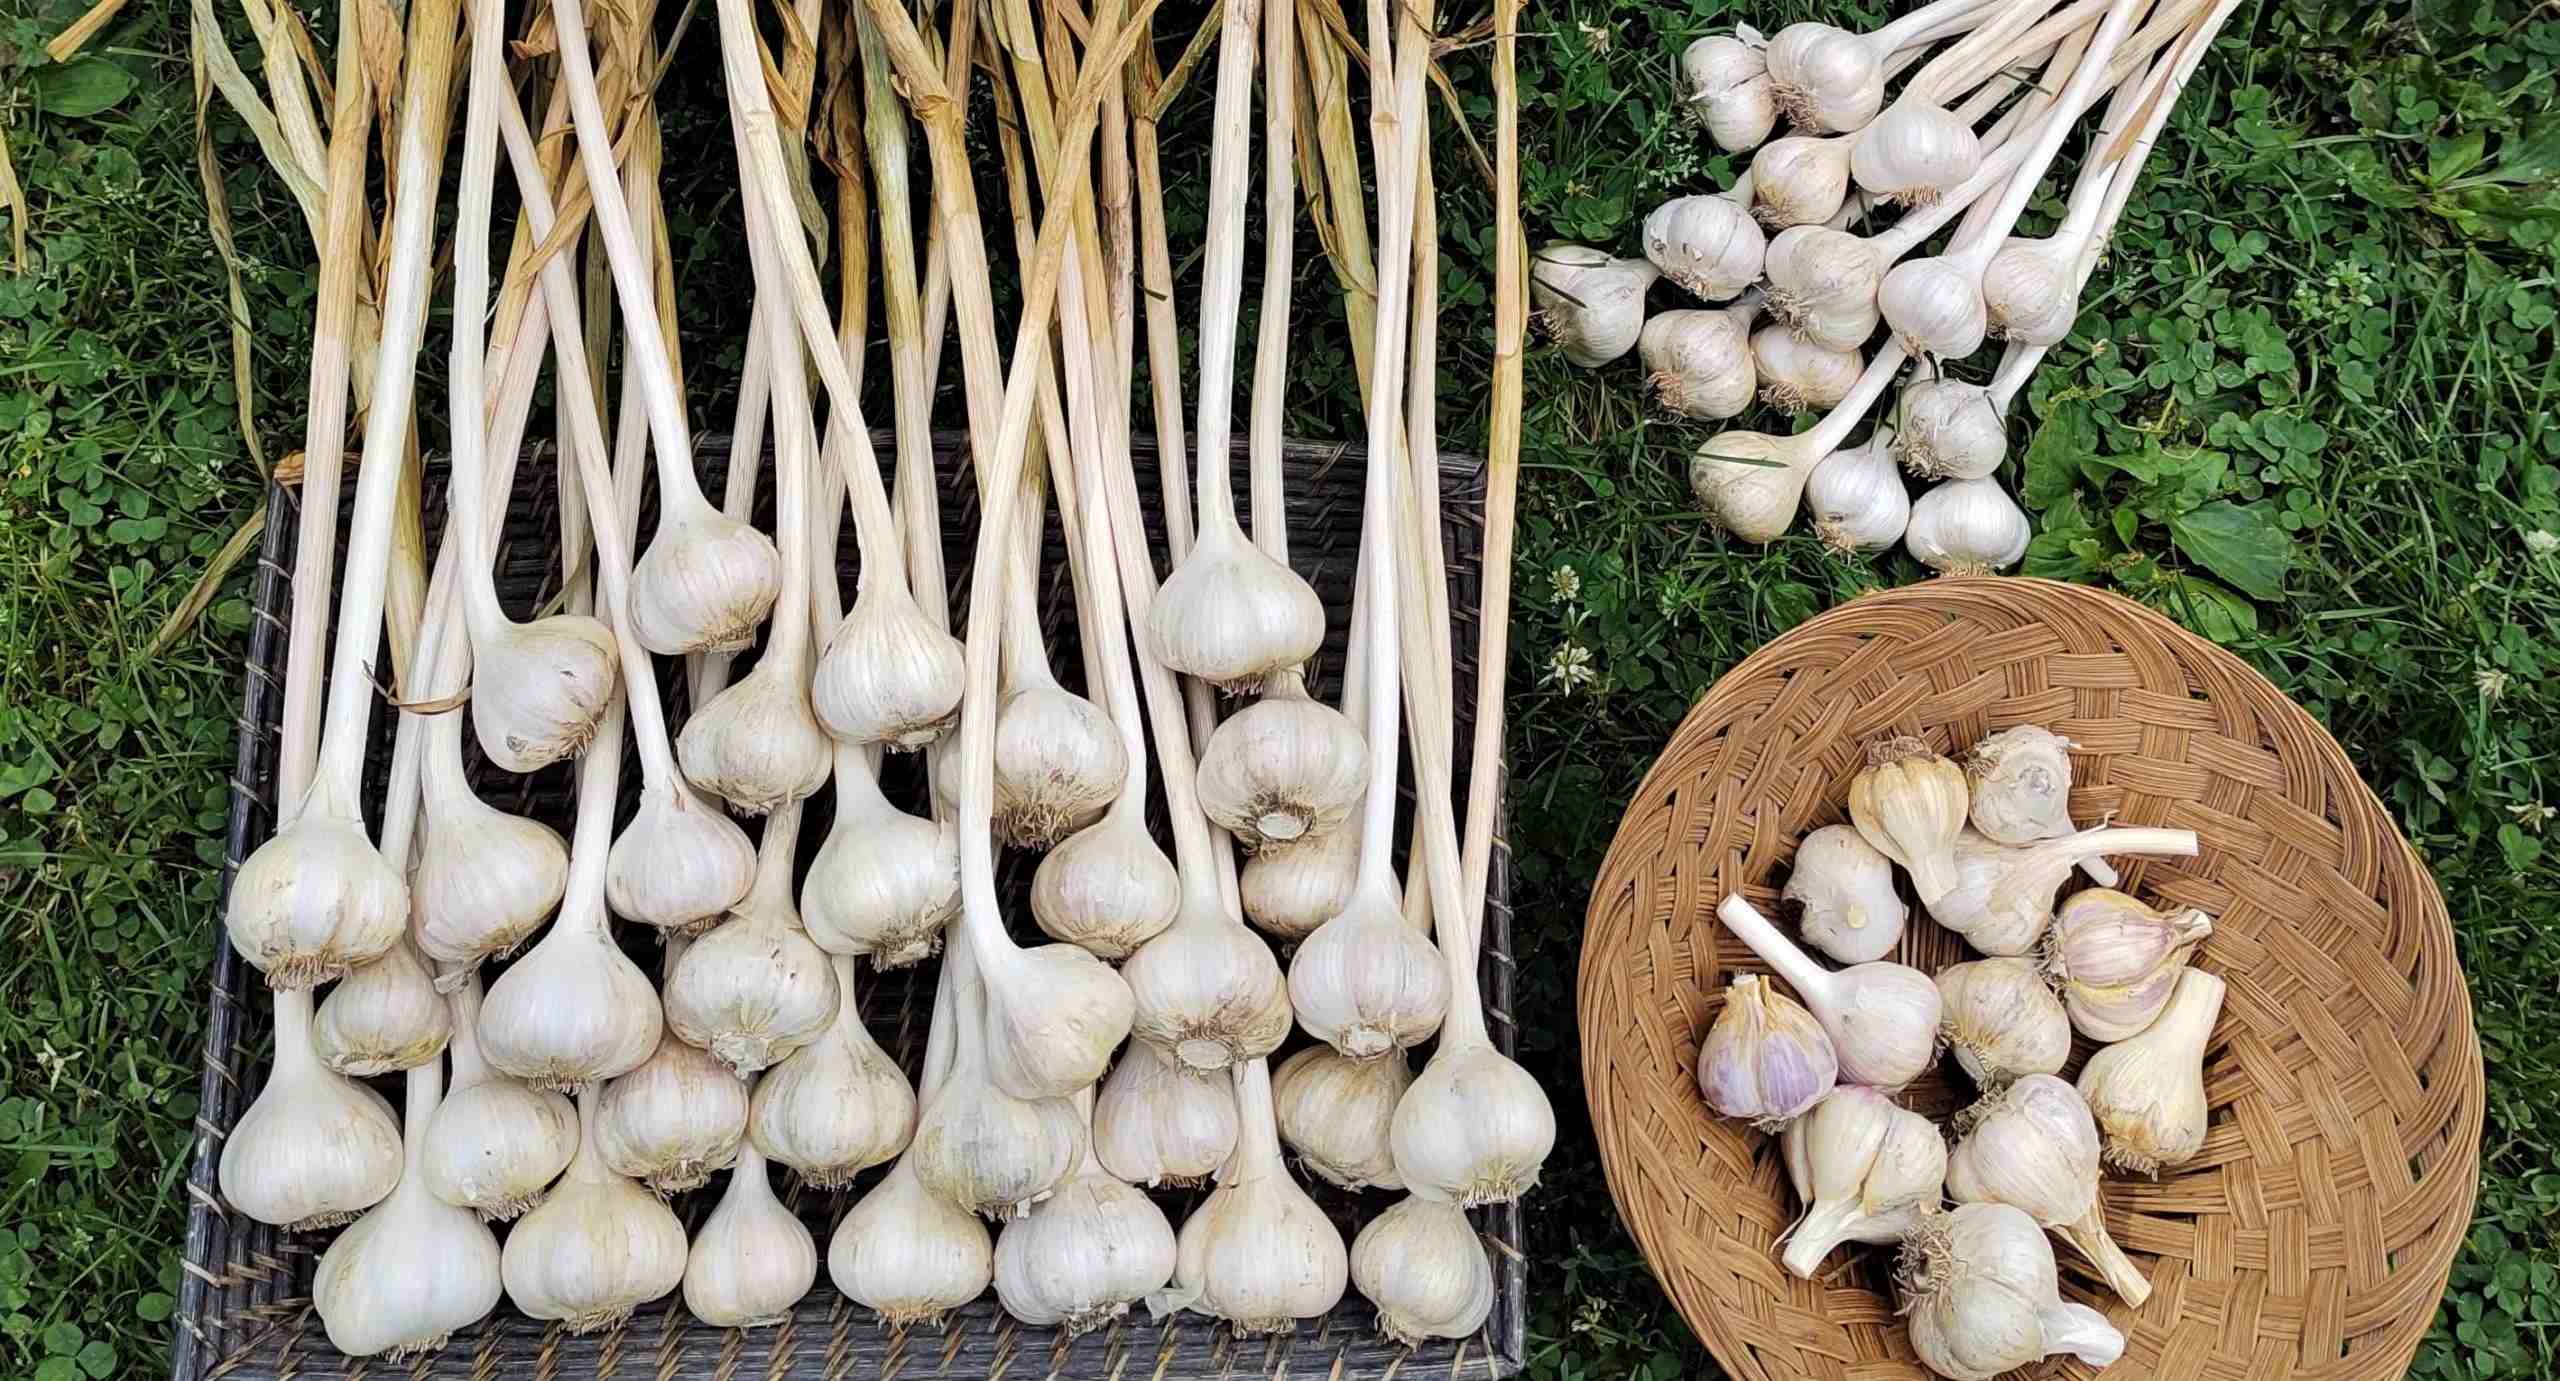 Where To Buy Garlic For Planting